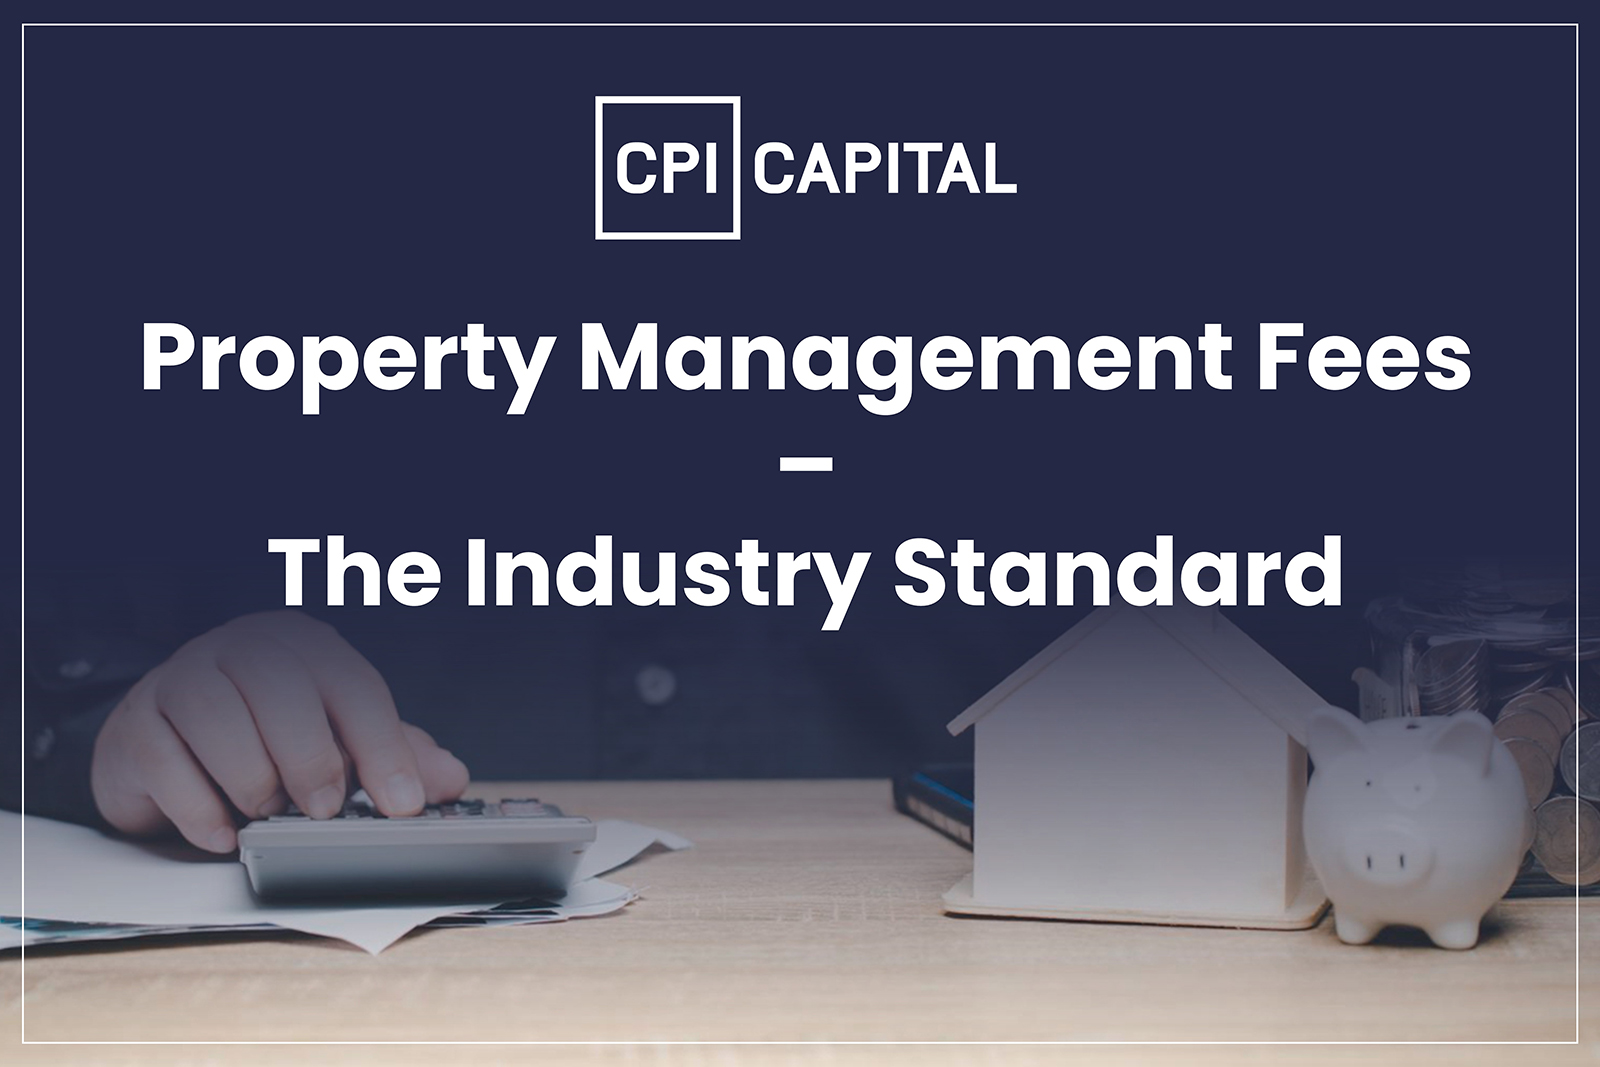 Property Management Fees for Multi-family and BTR-SFR Syndicated Real Estate Investment